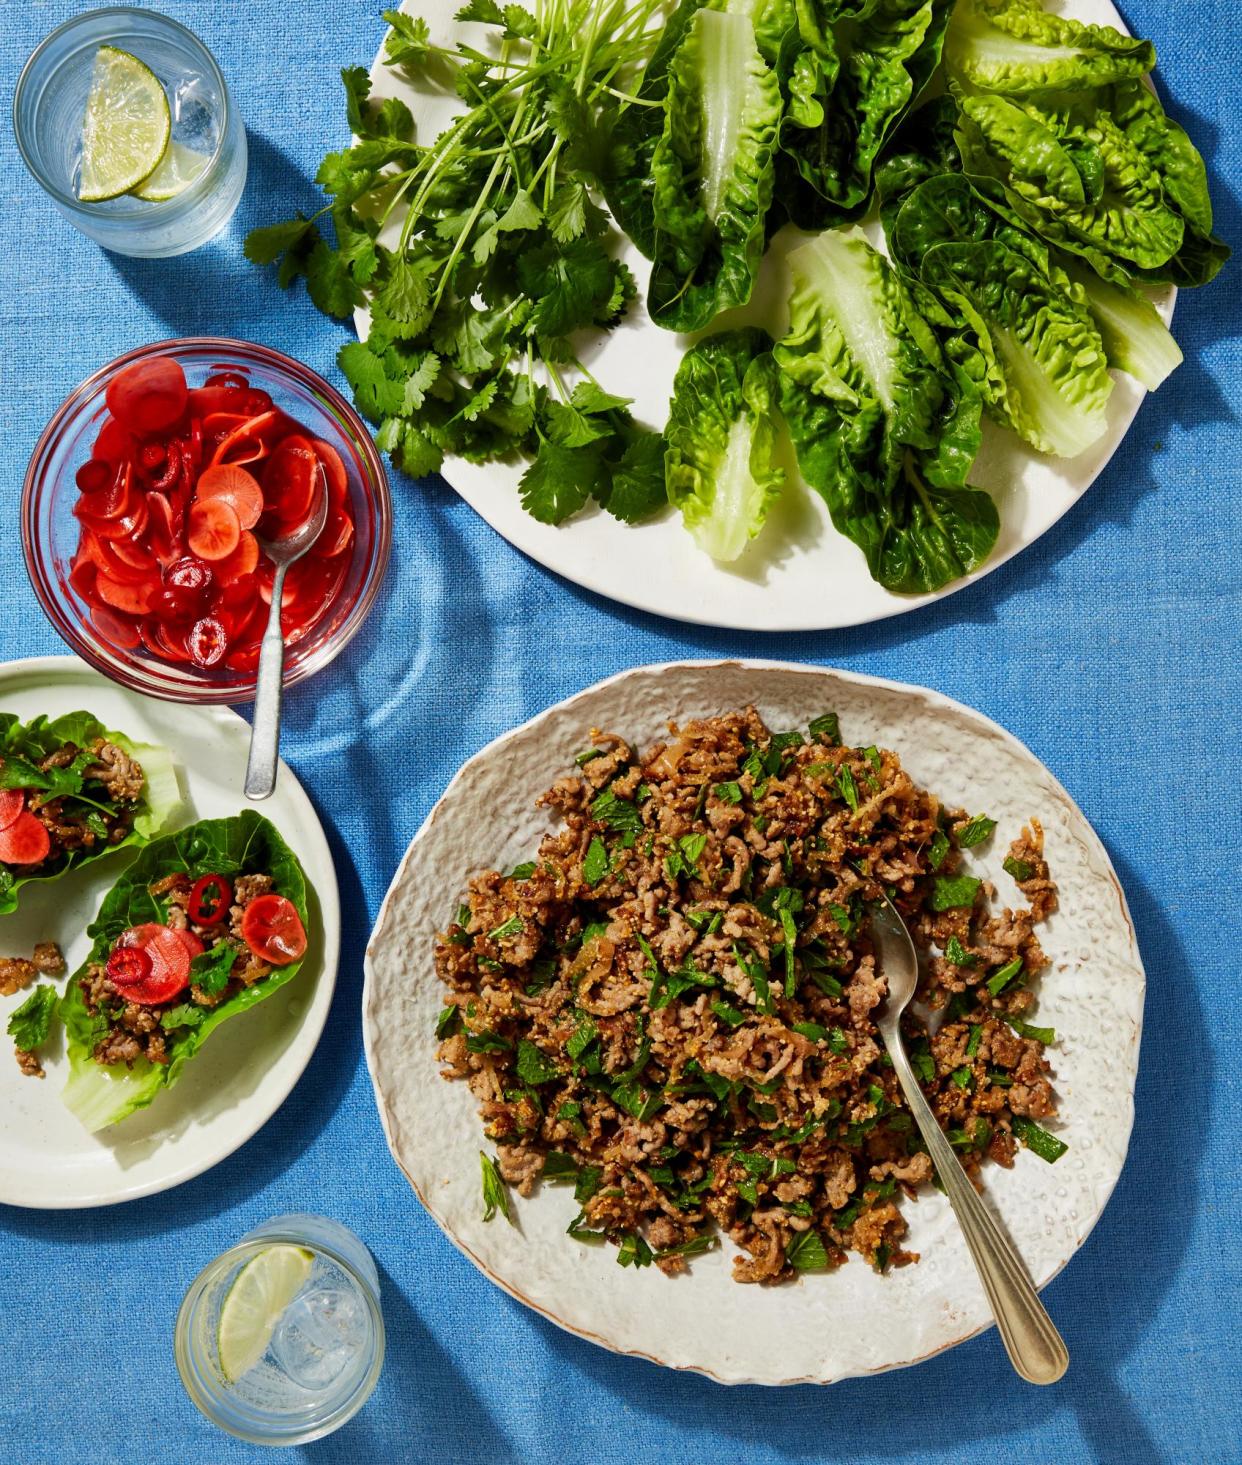 <span>Georgina Hayden’s pork larb with lime radishes.</span><span>Photograph: Louise Hagger/The Guardian. Food styling: Emily Kydd. Prop styling: Jennifer Kay. Food styling assistant: Eden Owen-Jones.</span>